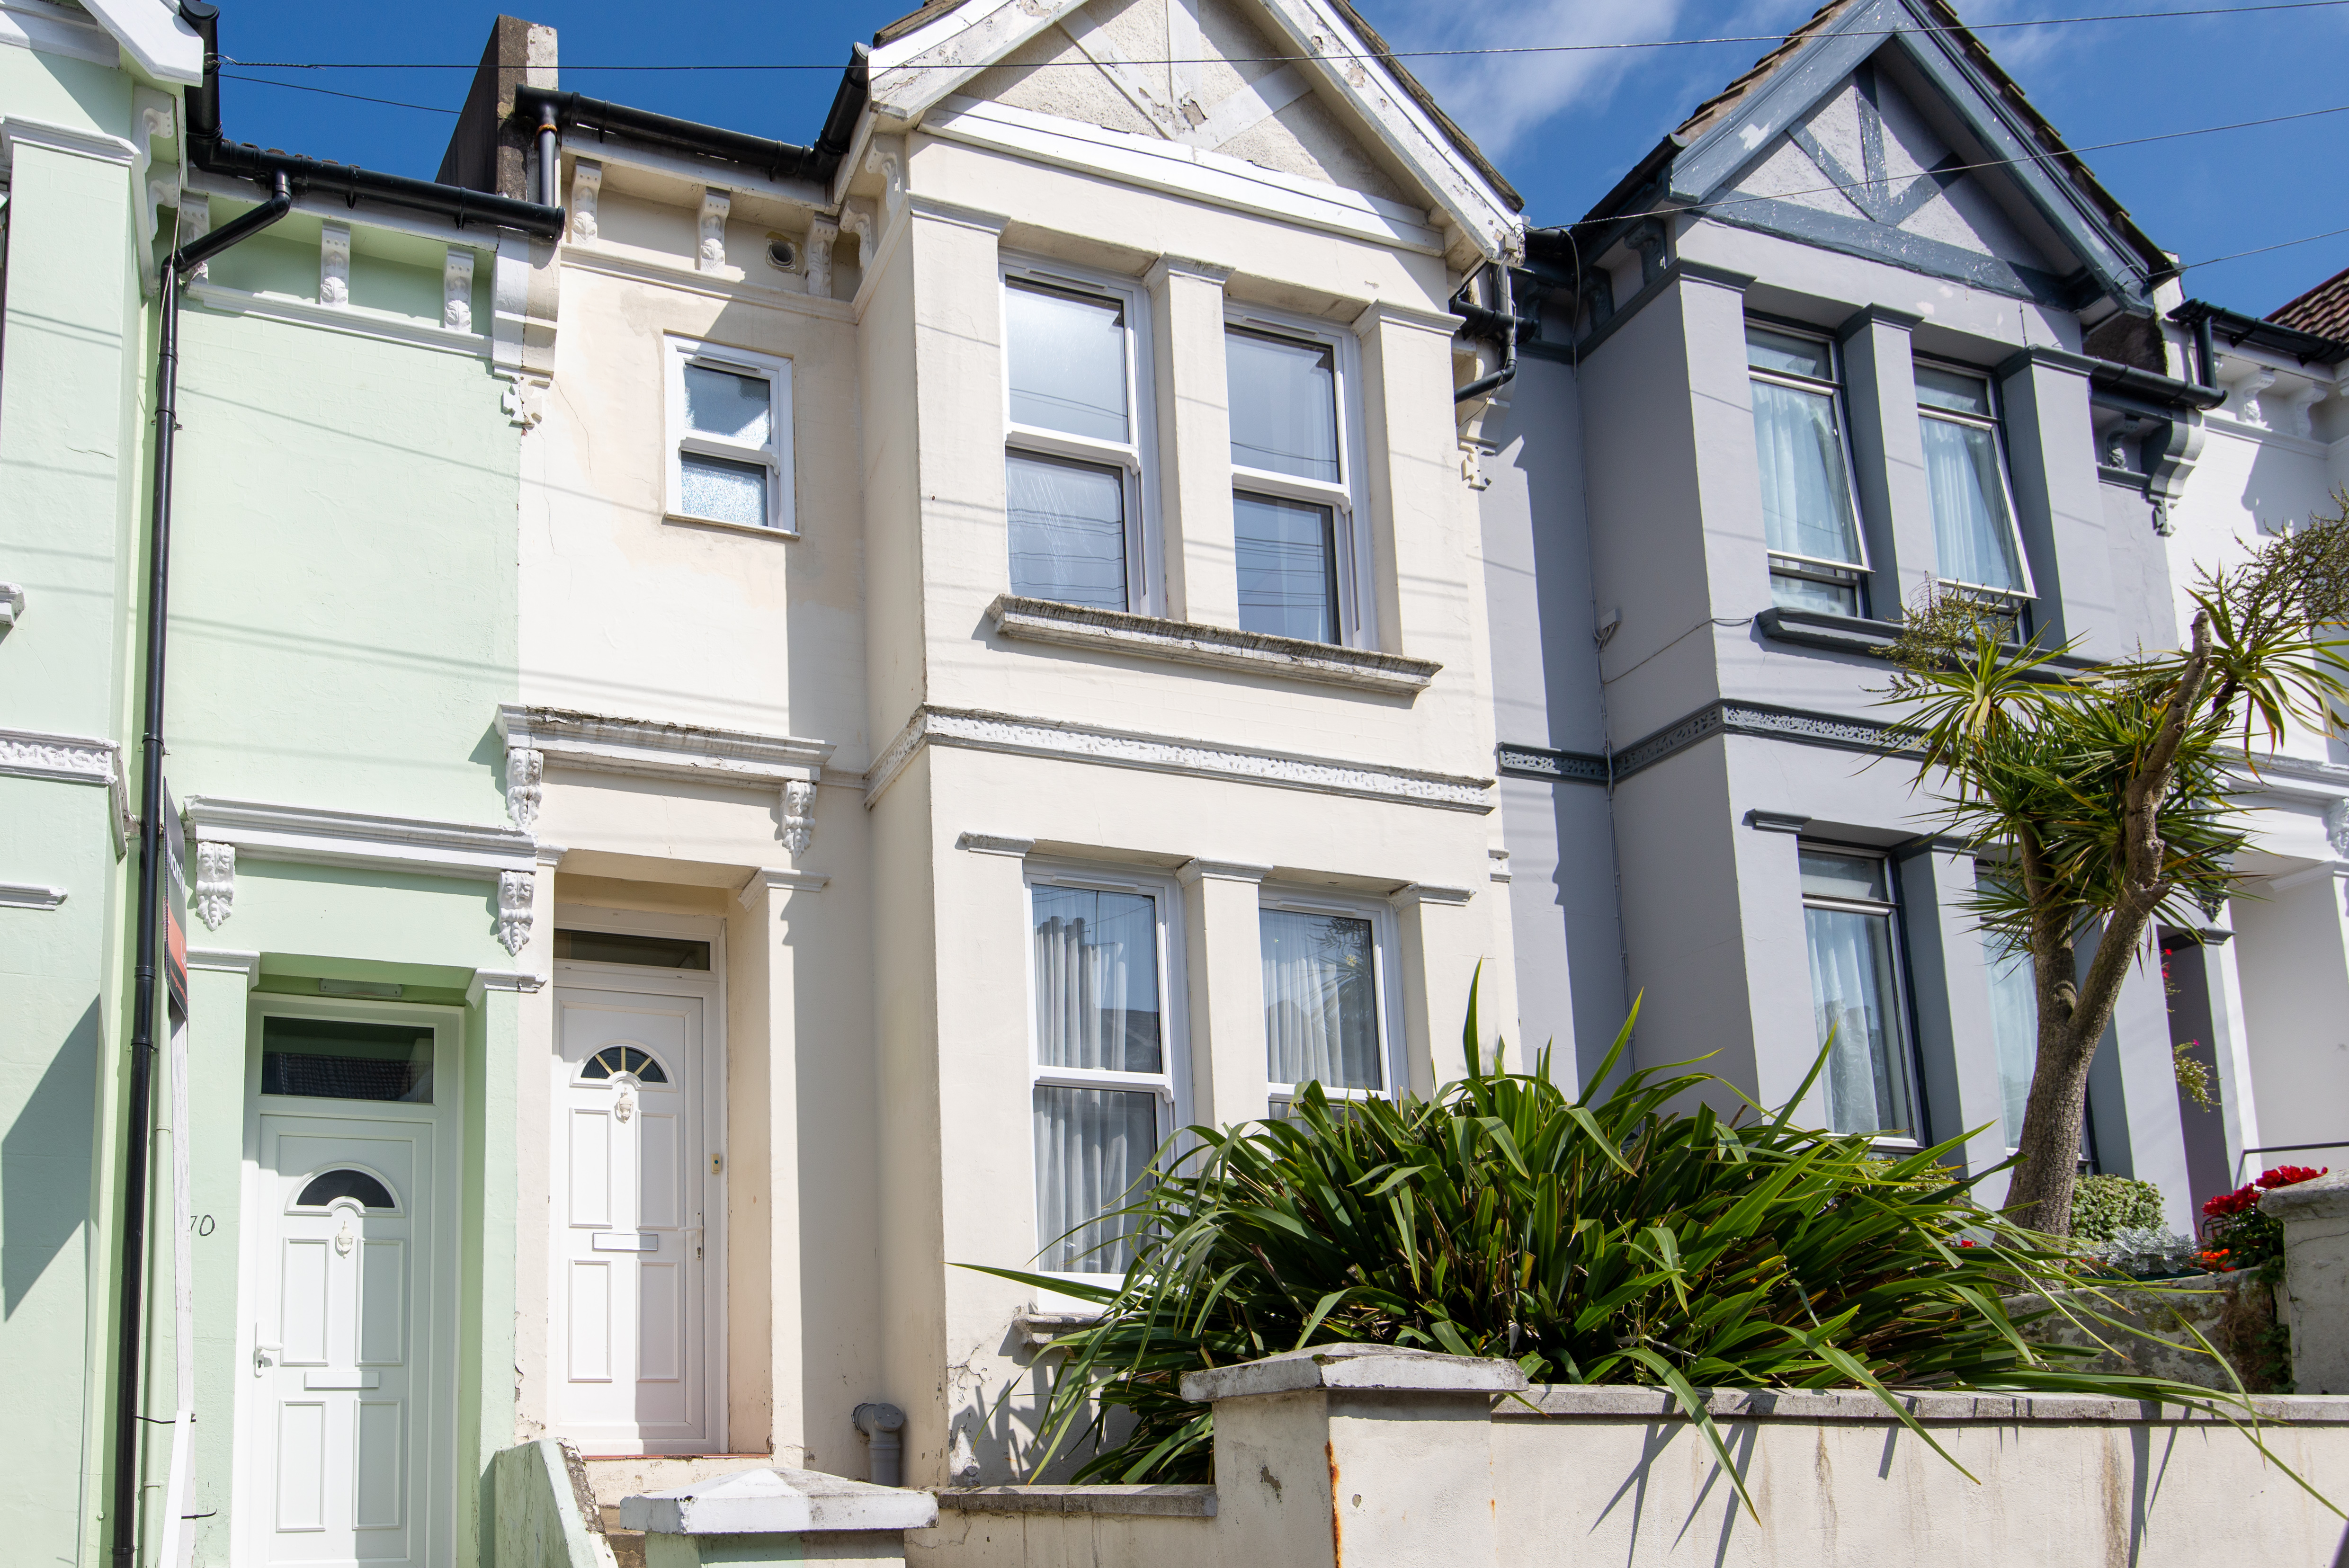 G4lets Student Accommodation Rents And Lettings In Brighton